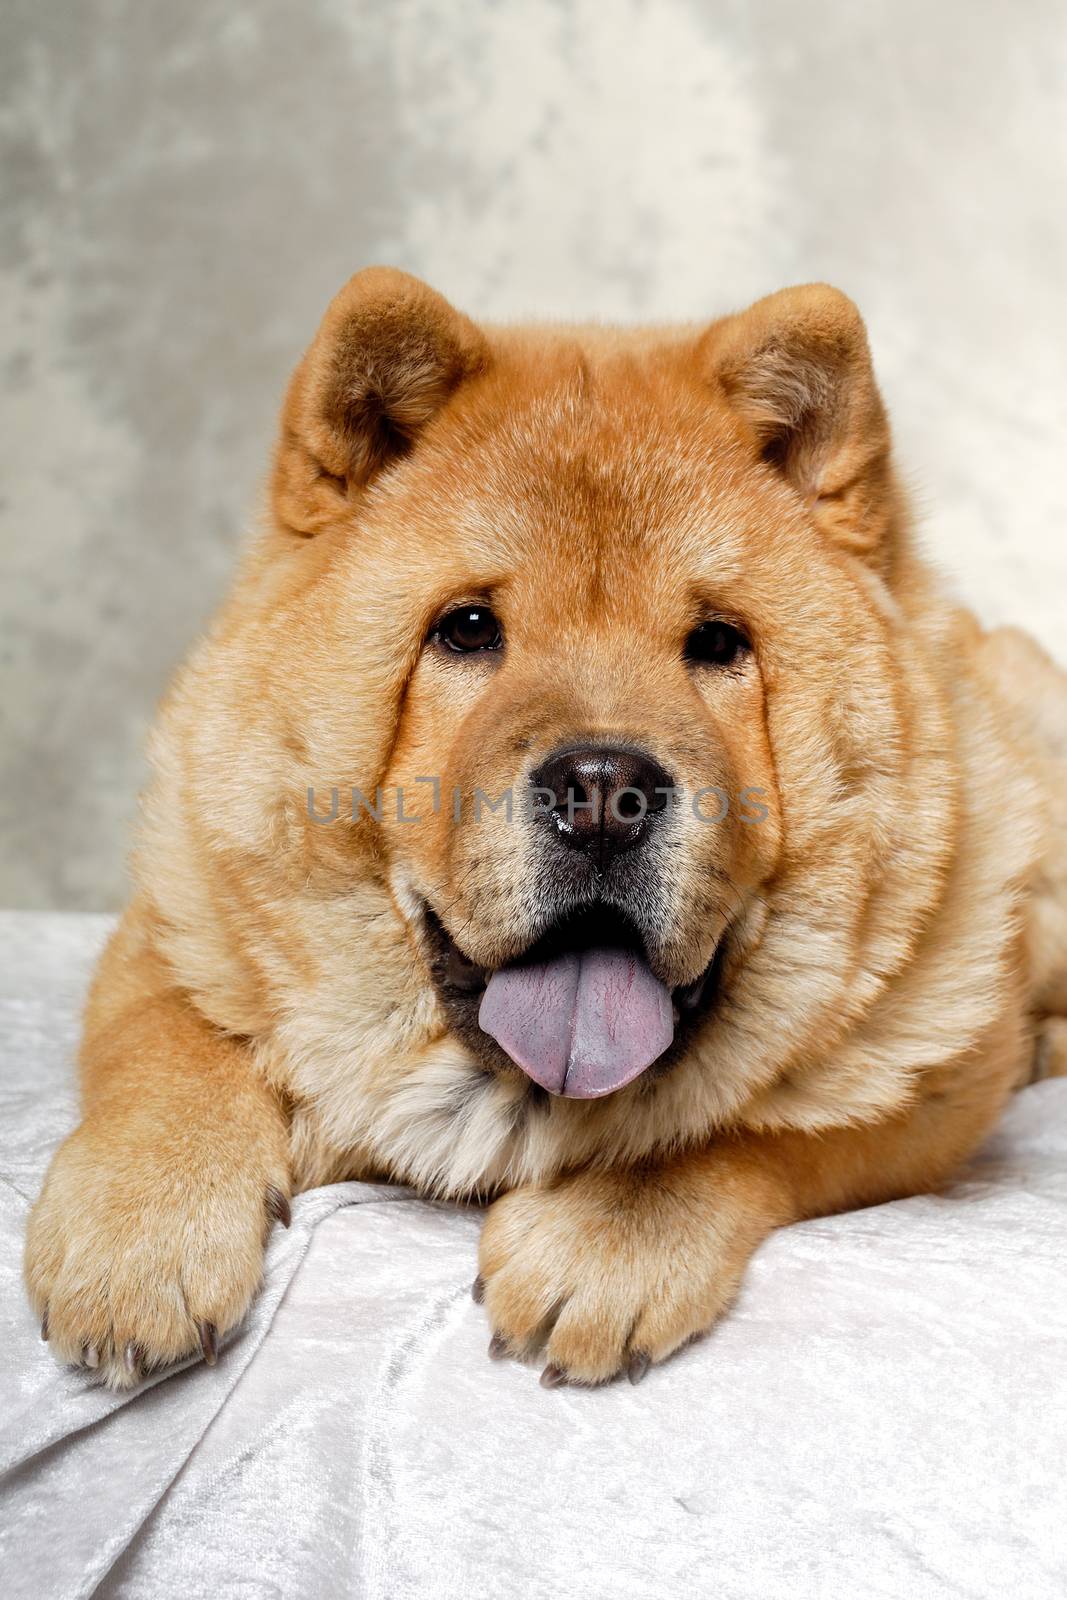 A Chow dog is resting